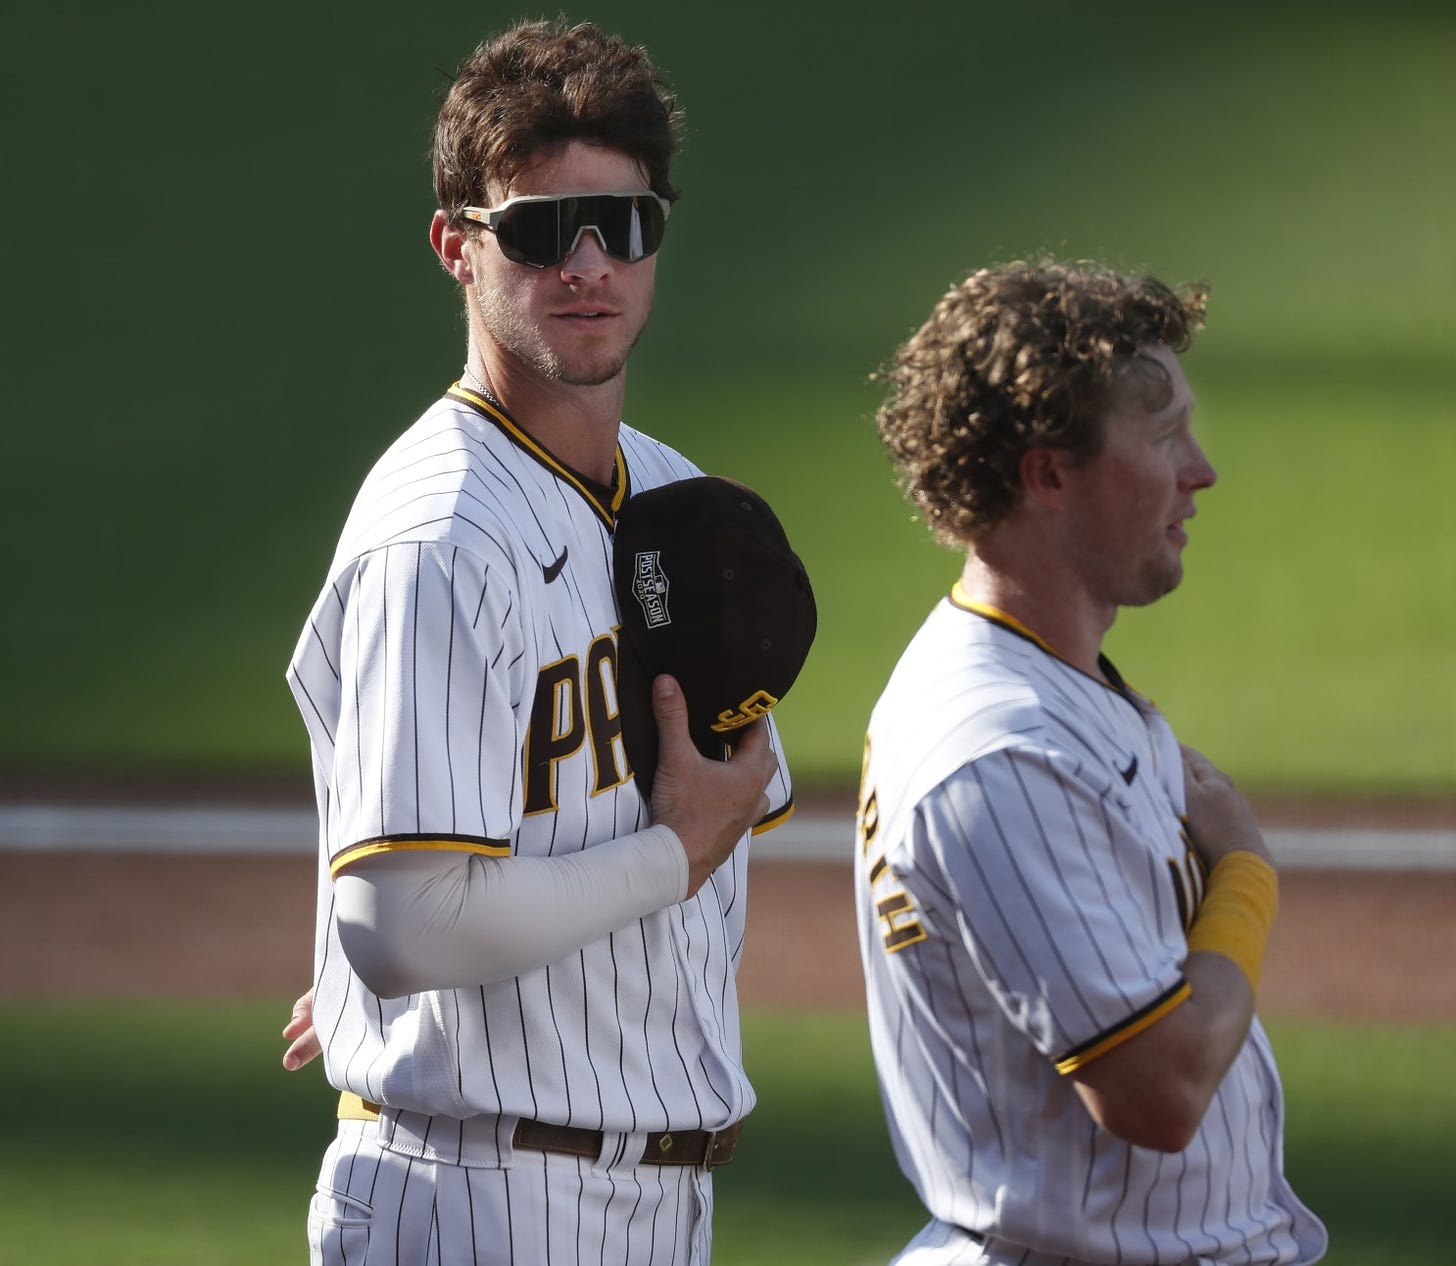 Padres Editorial: 10 Reasons Why Wil Myers is an All-Star